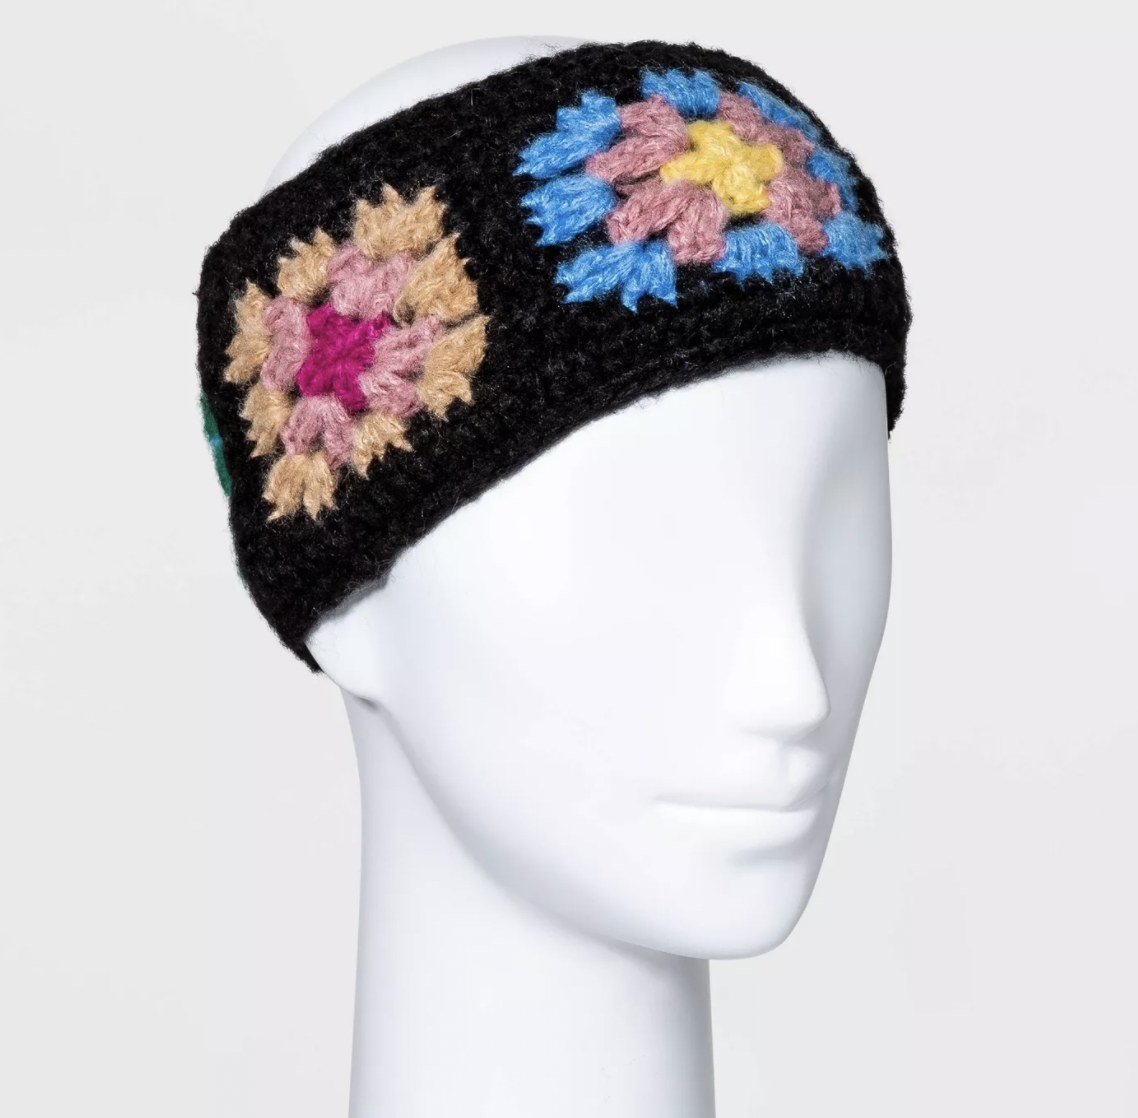 Mannequin wearing square knit headband